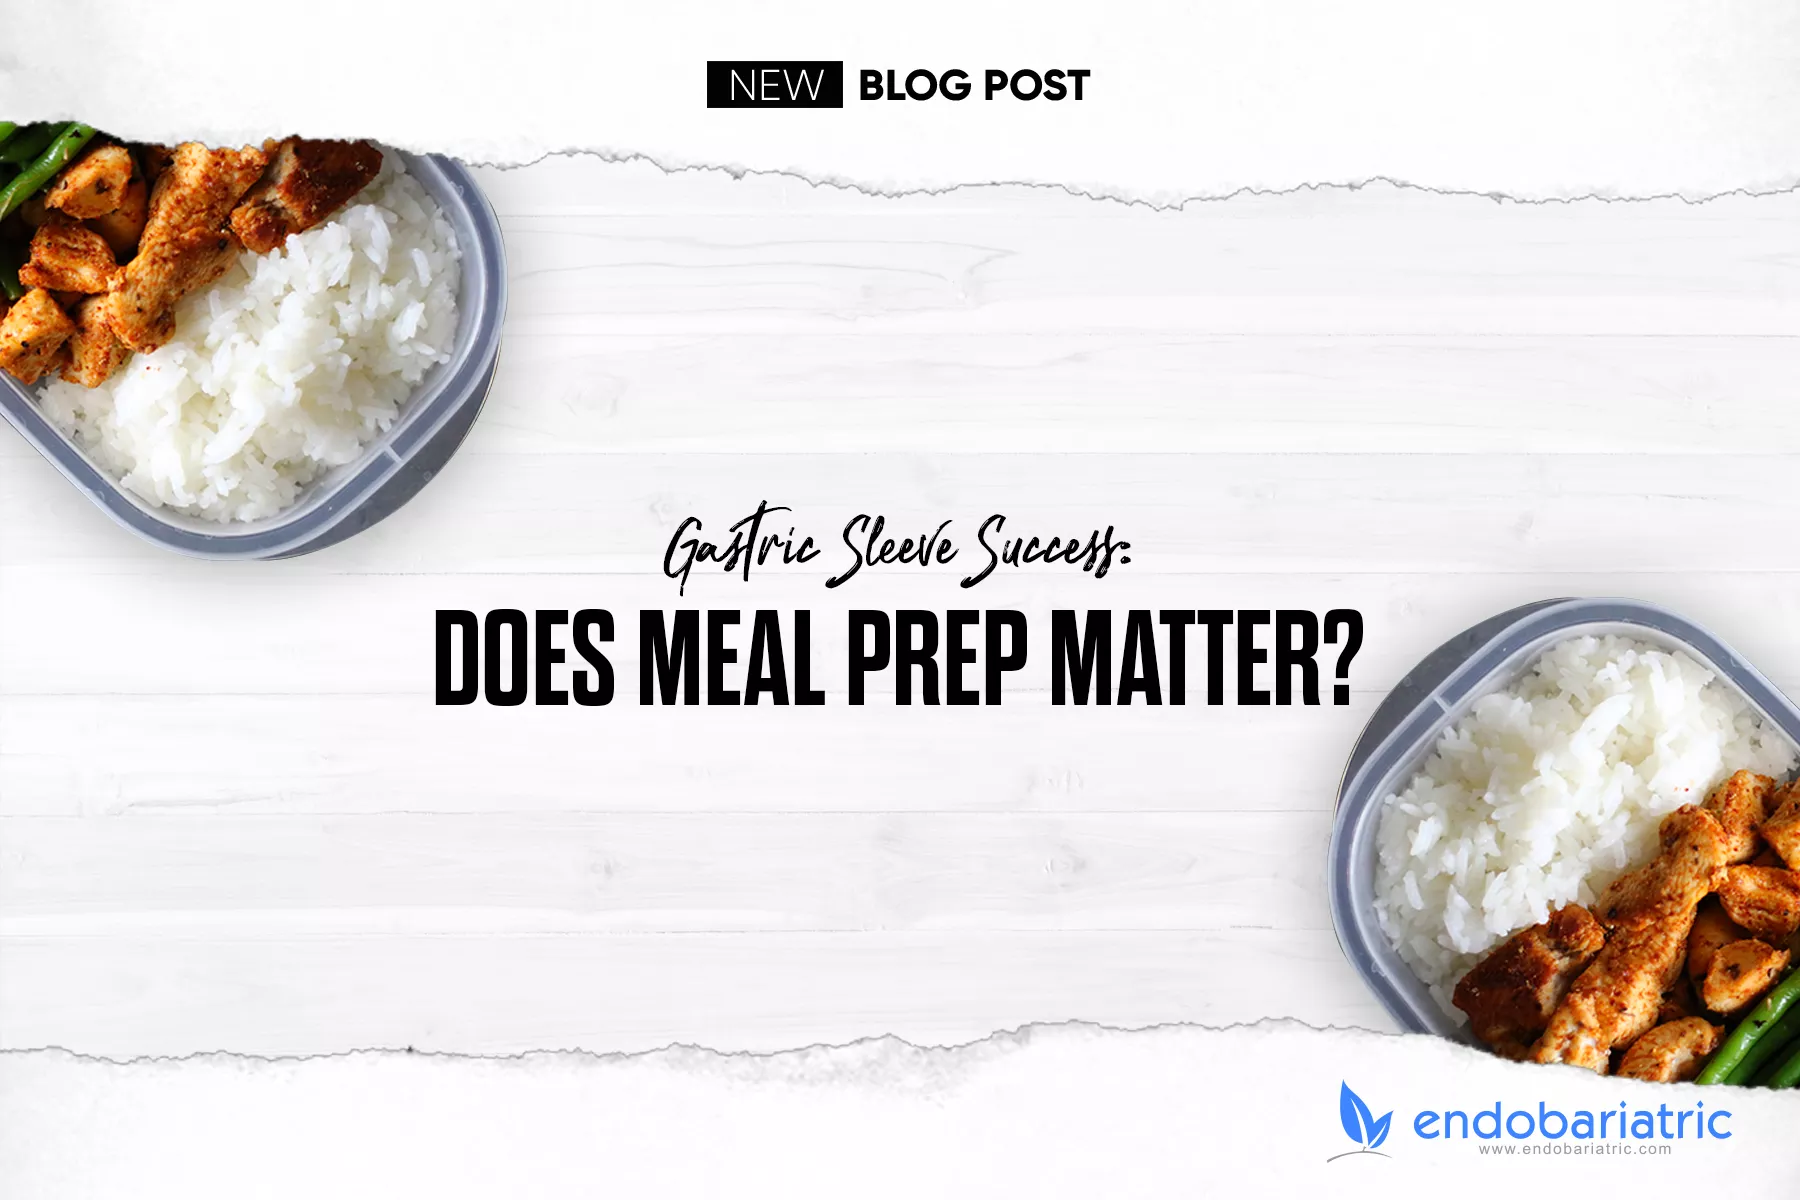 https://www.endobariatric.com/wp-content/uploads/2019/04/xblog-diseno-does-meal-prep-matter.jpg.pagespeed.ic_.2XacciqJ1Z.jpg